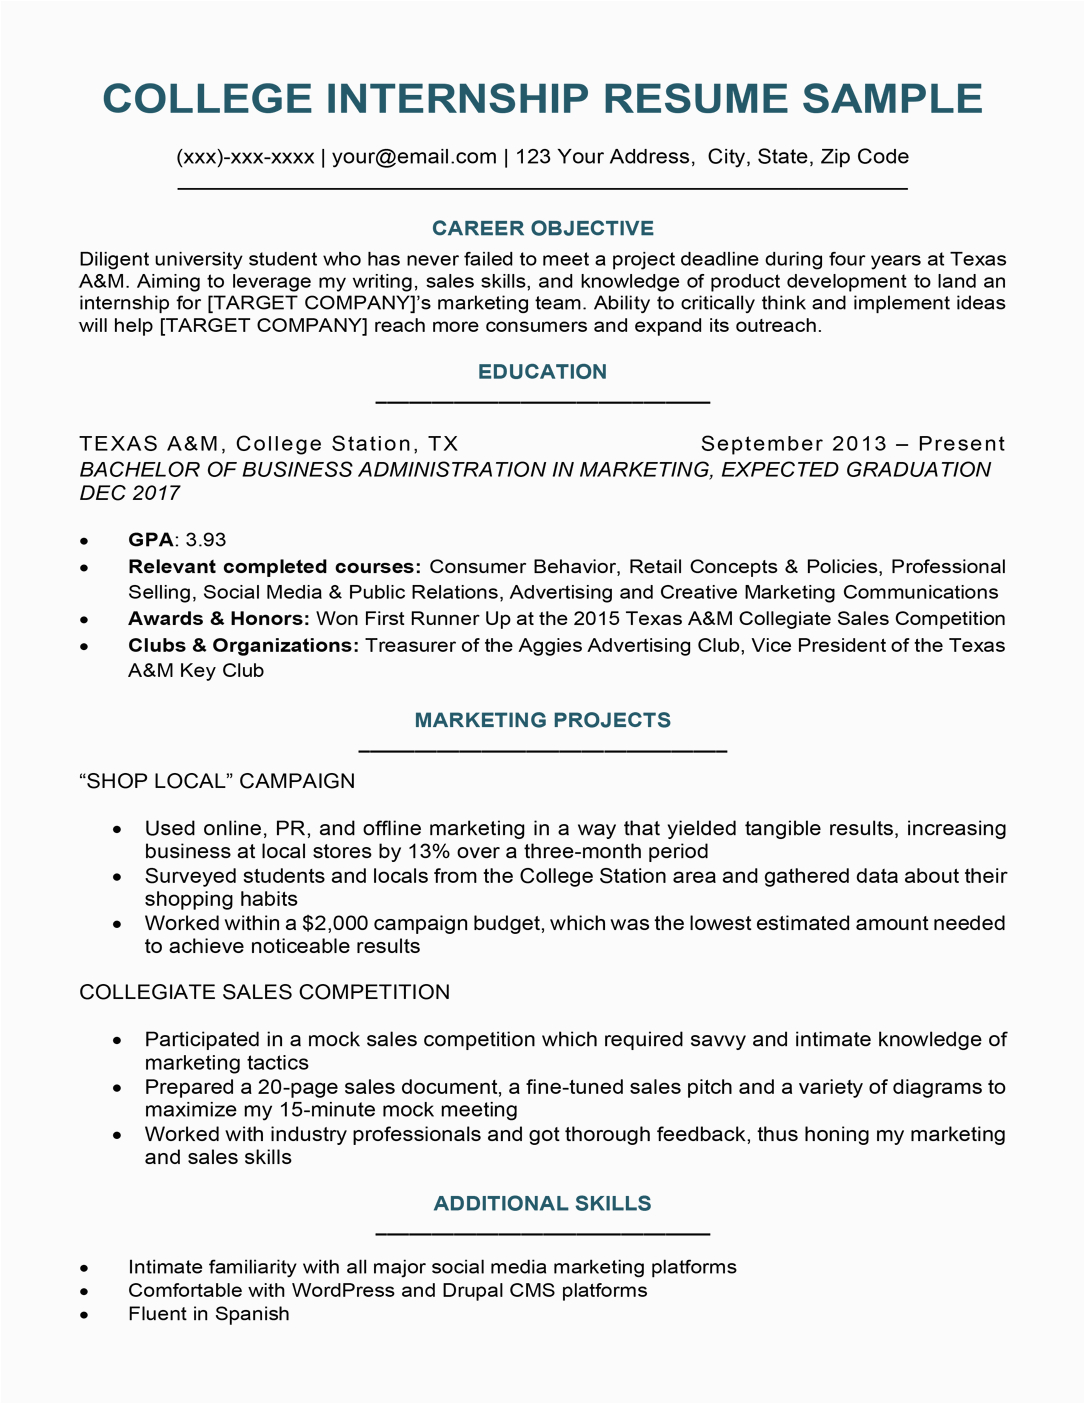 Resume Objective Samples for College Students College Student Resume Sample & Writing Tips